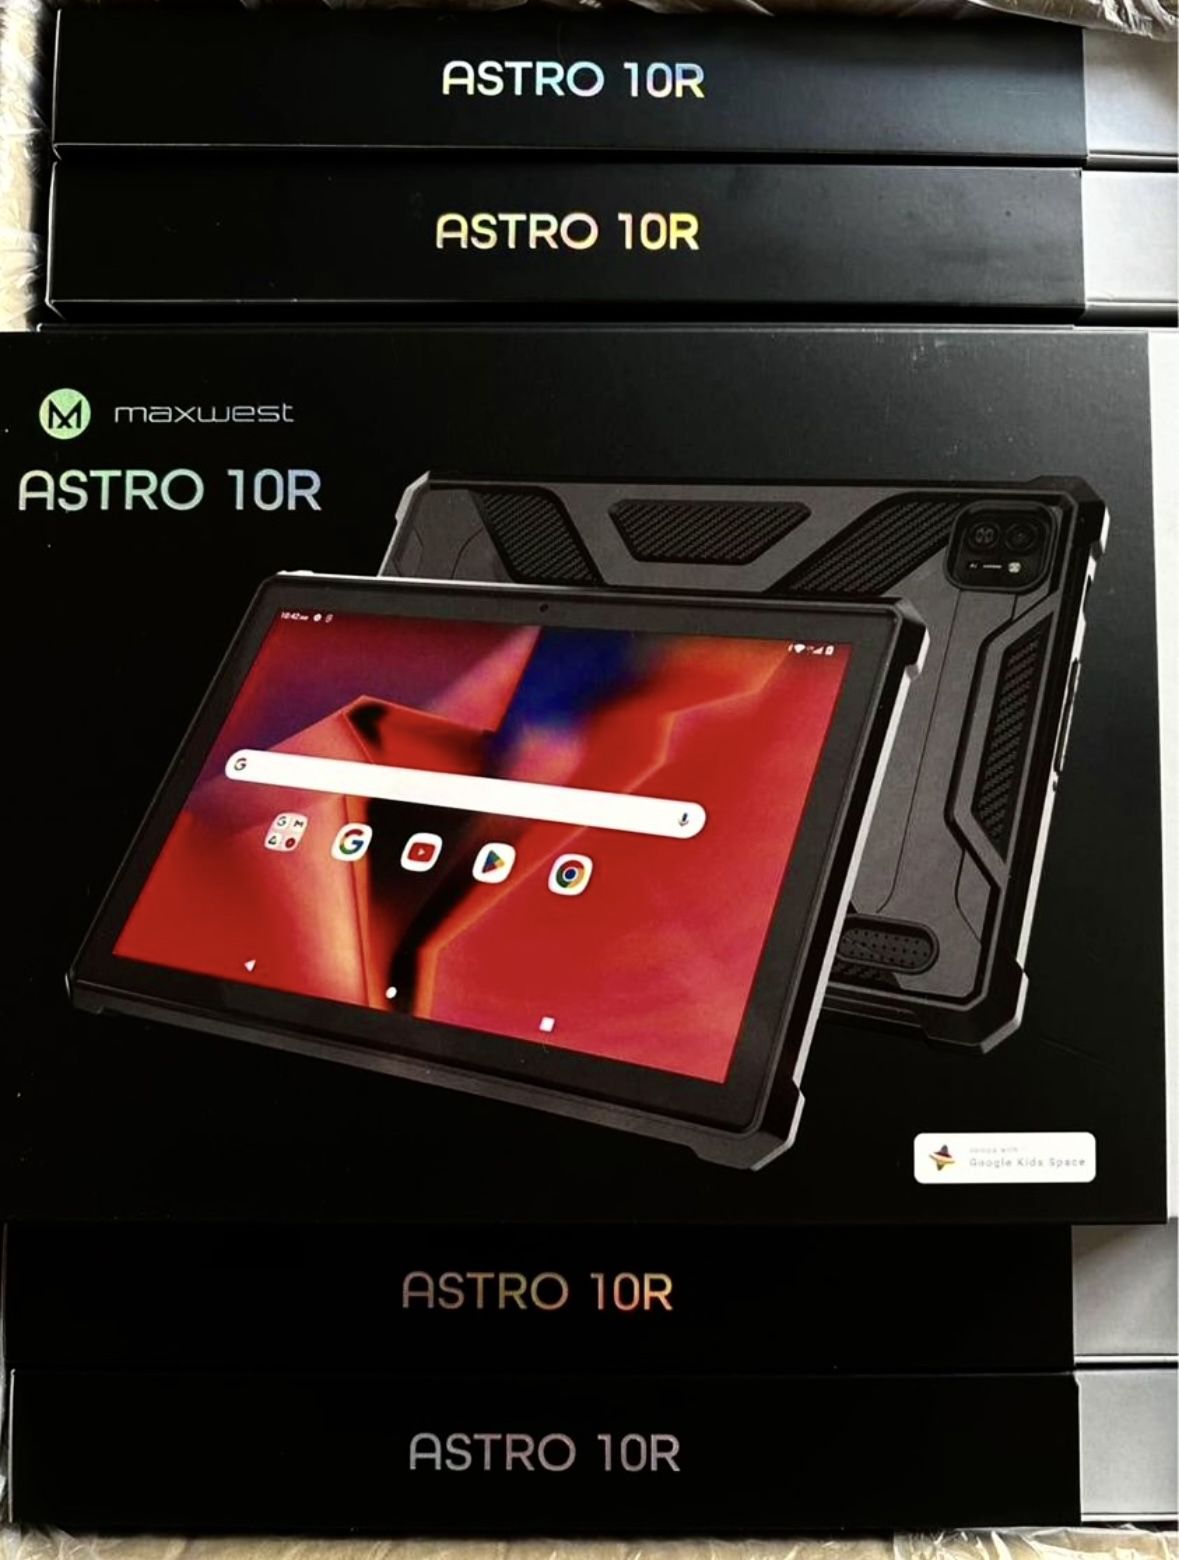 Android Tablets / Maxwest Astro 10R (with Service Available)